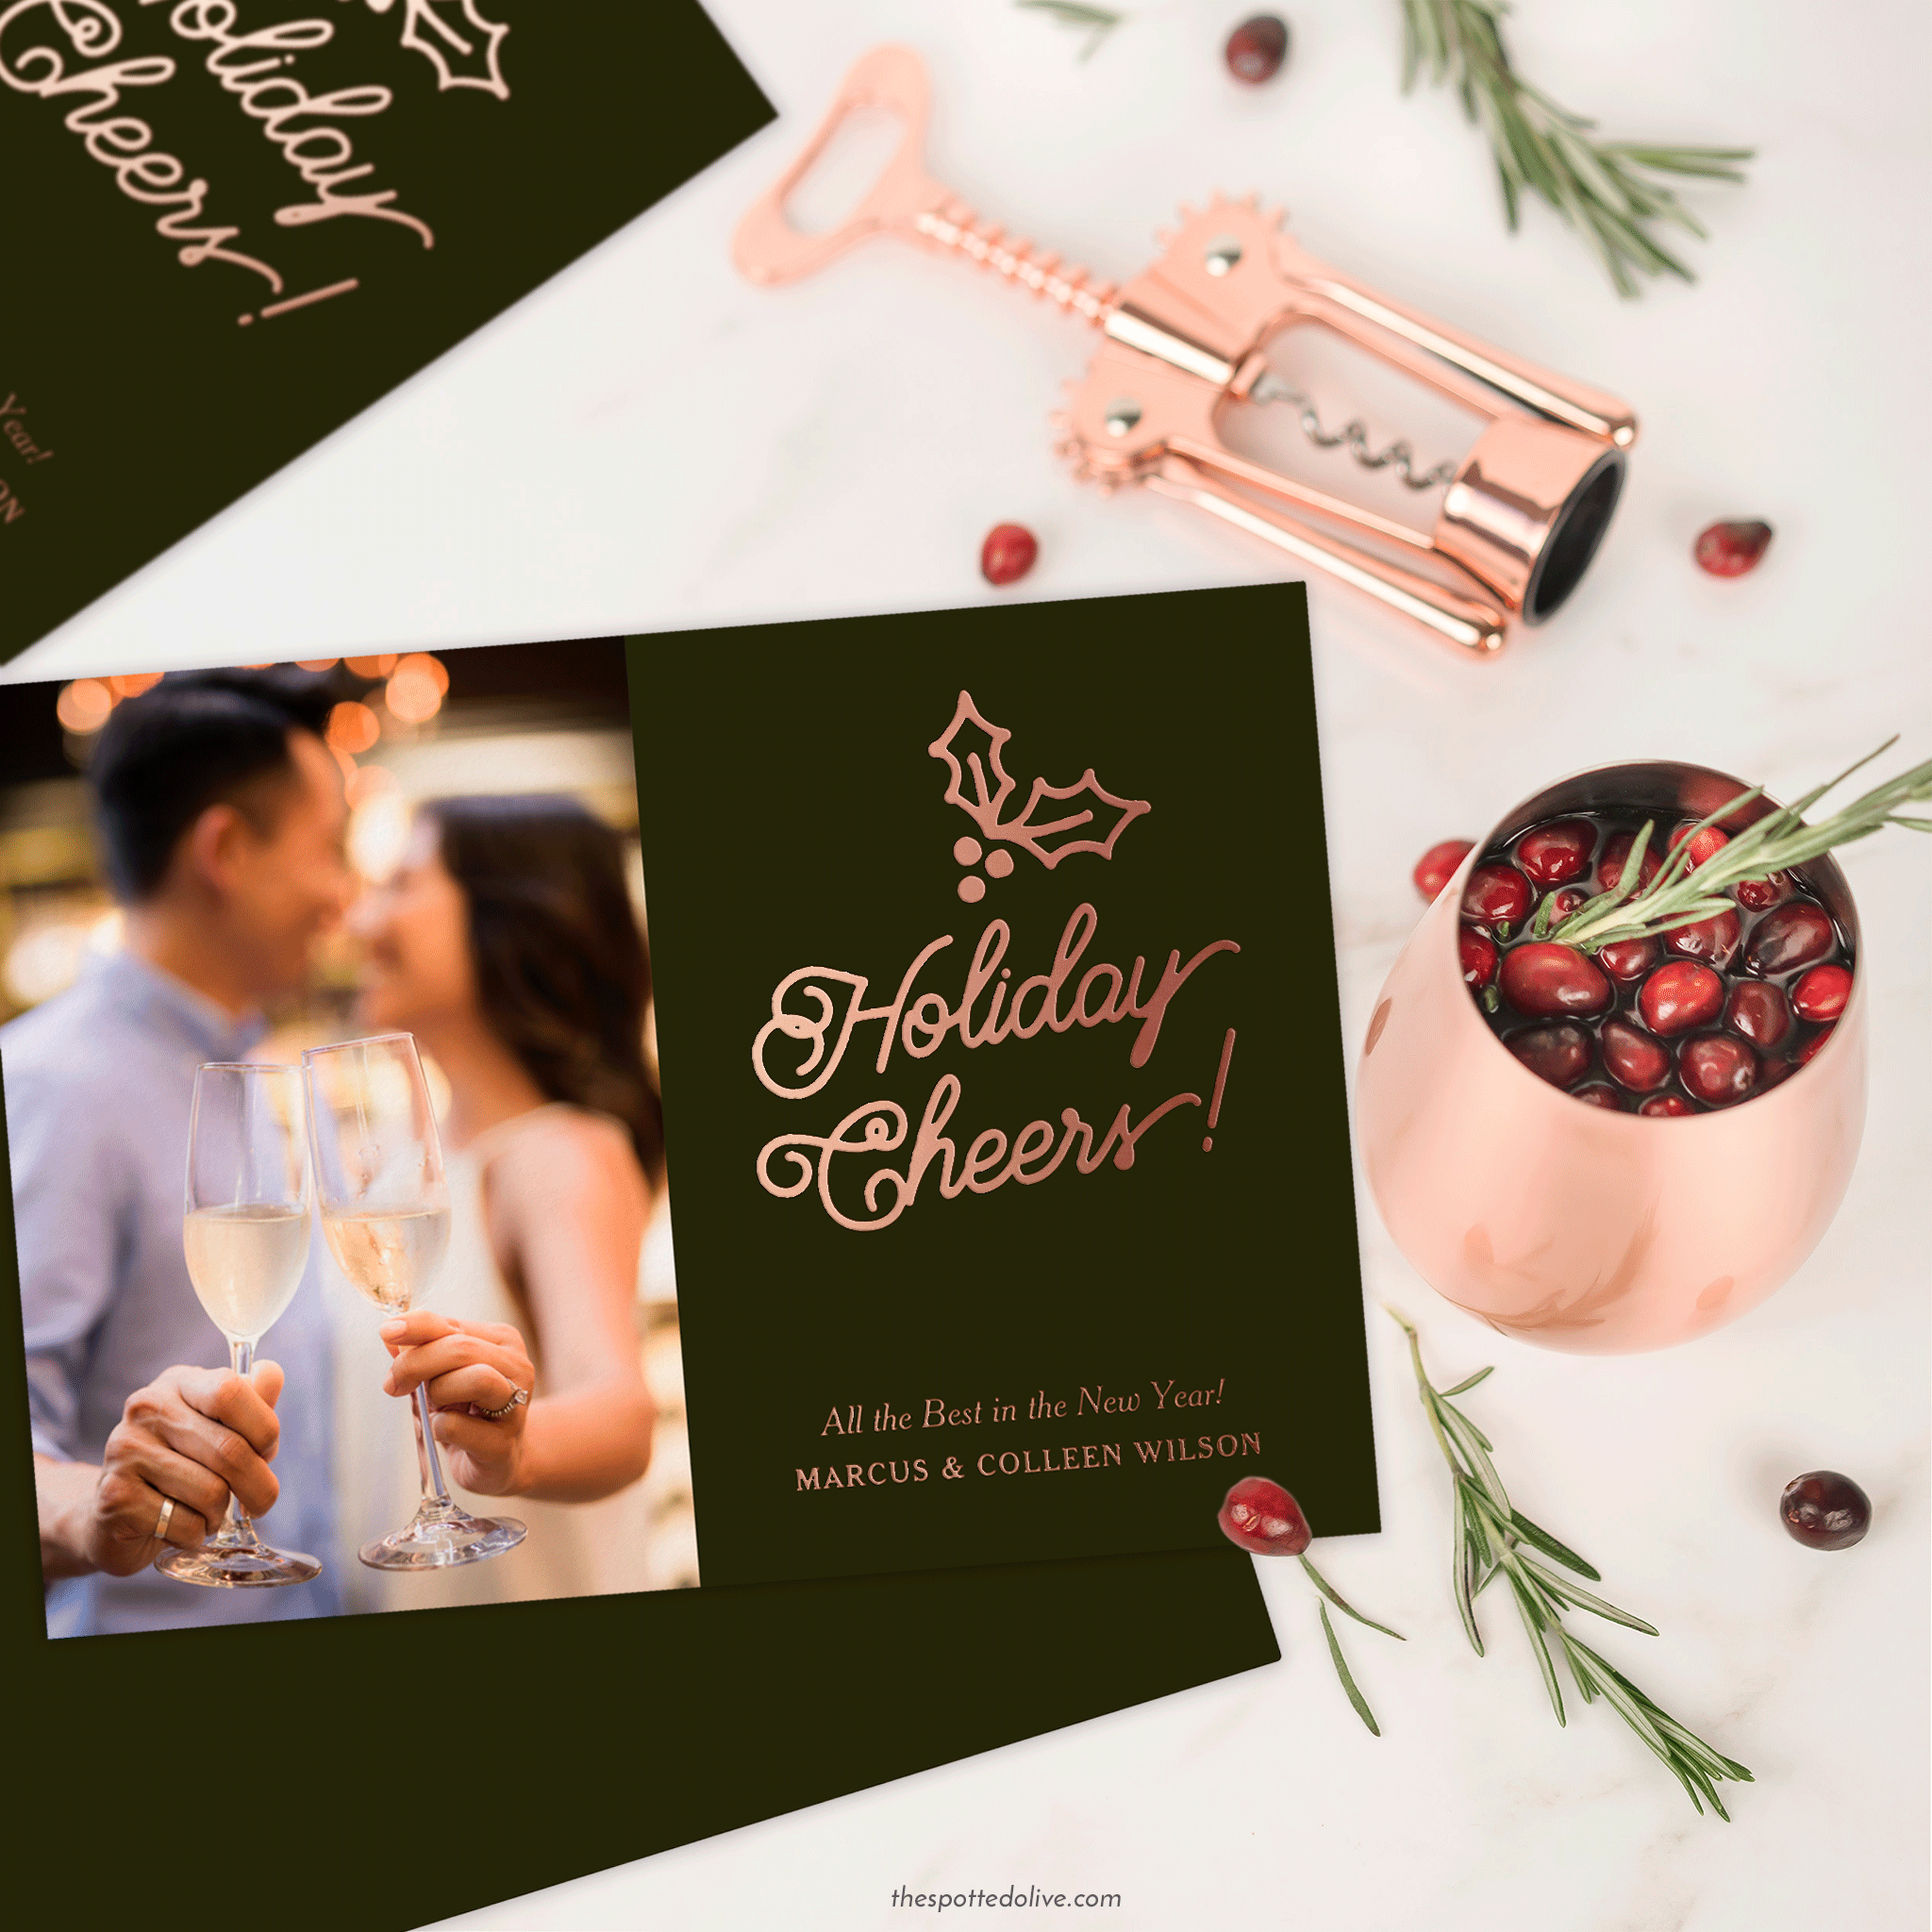 Holiday Cheers Foil Holiday Cards by The Spotted Olive